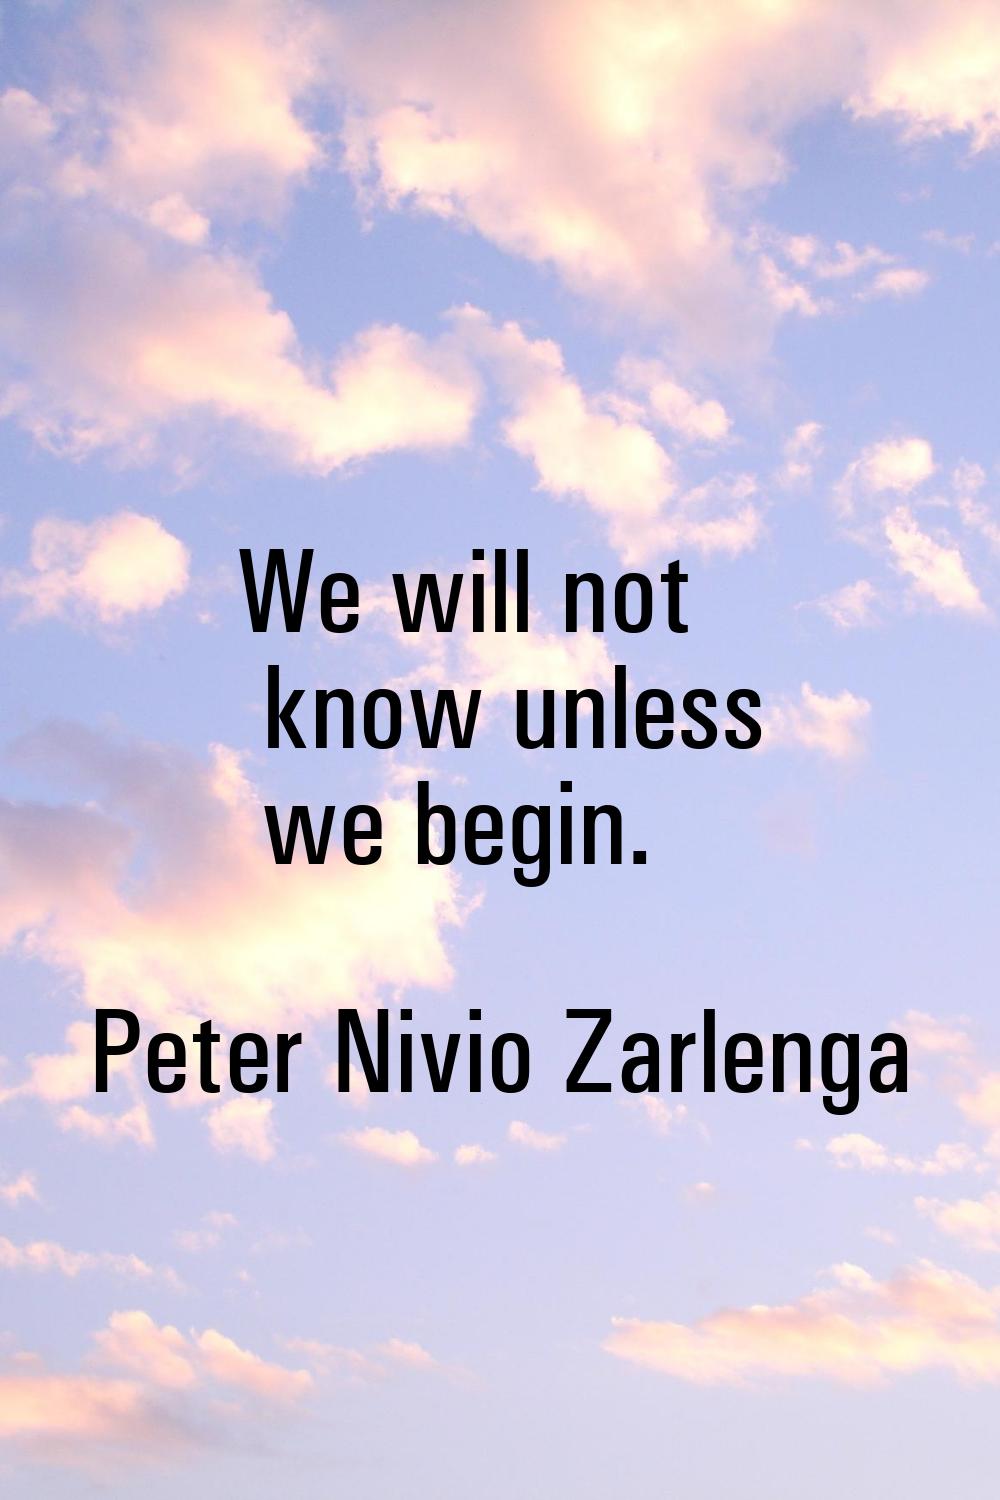 We will not know unless we begin.